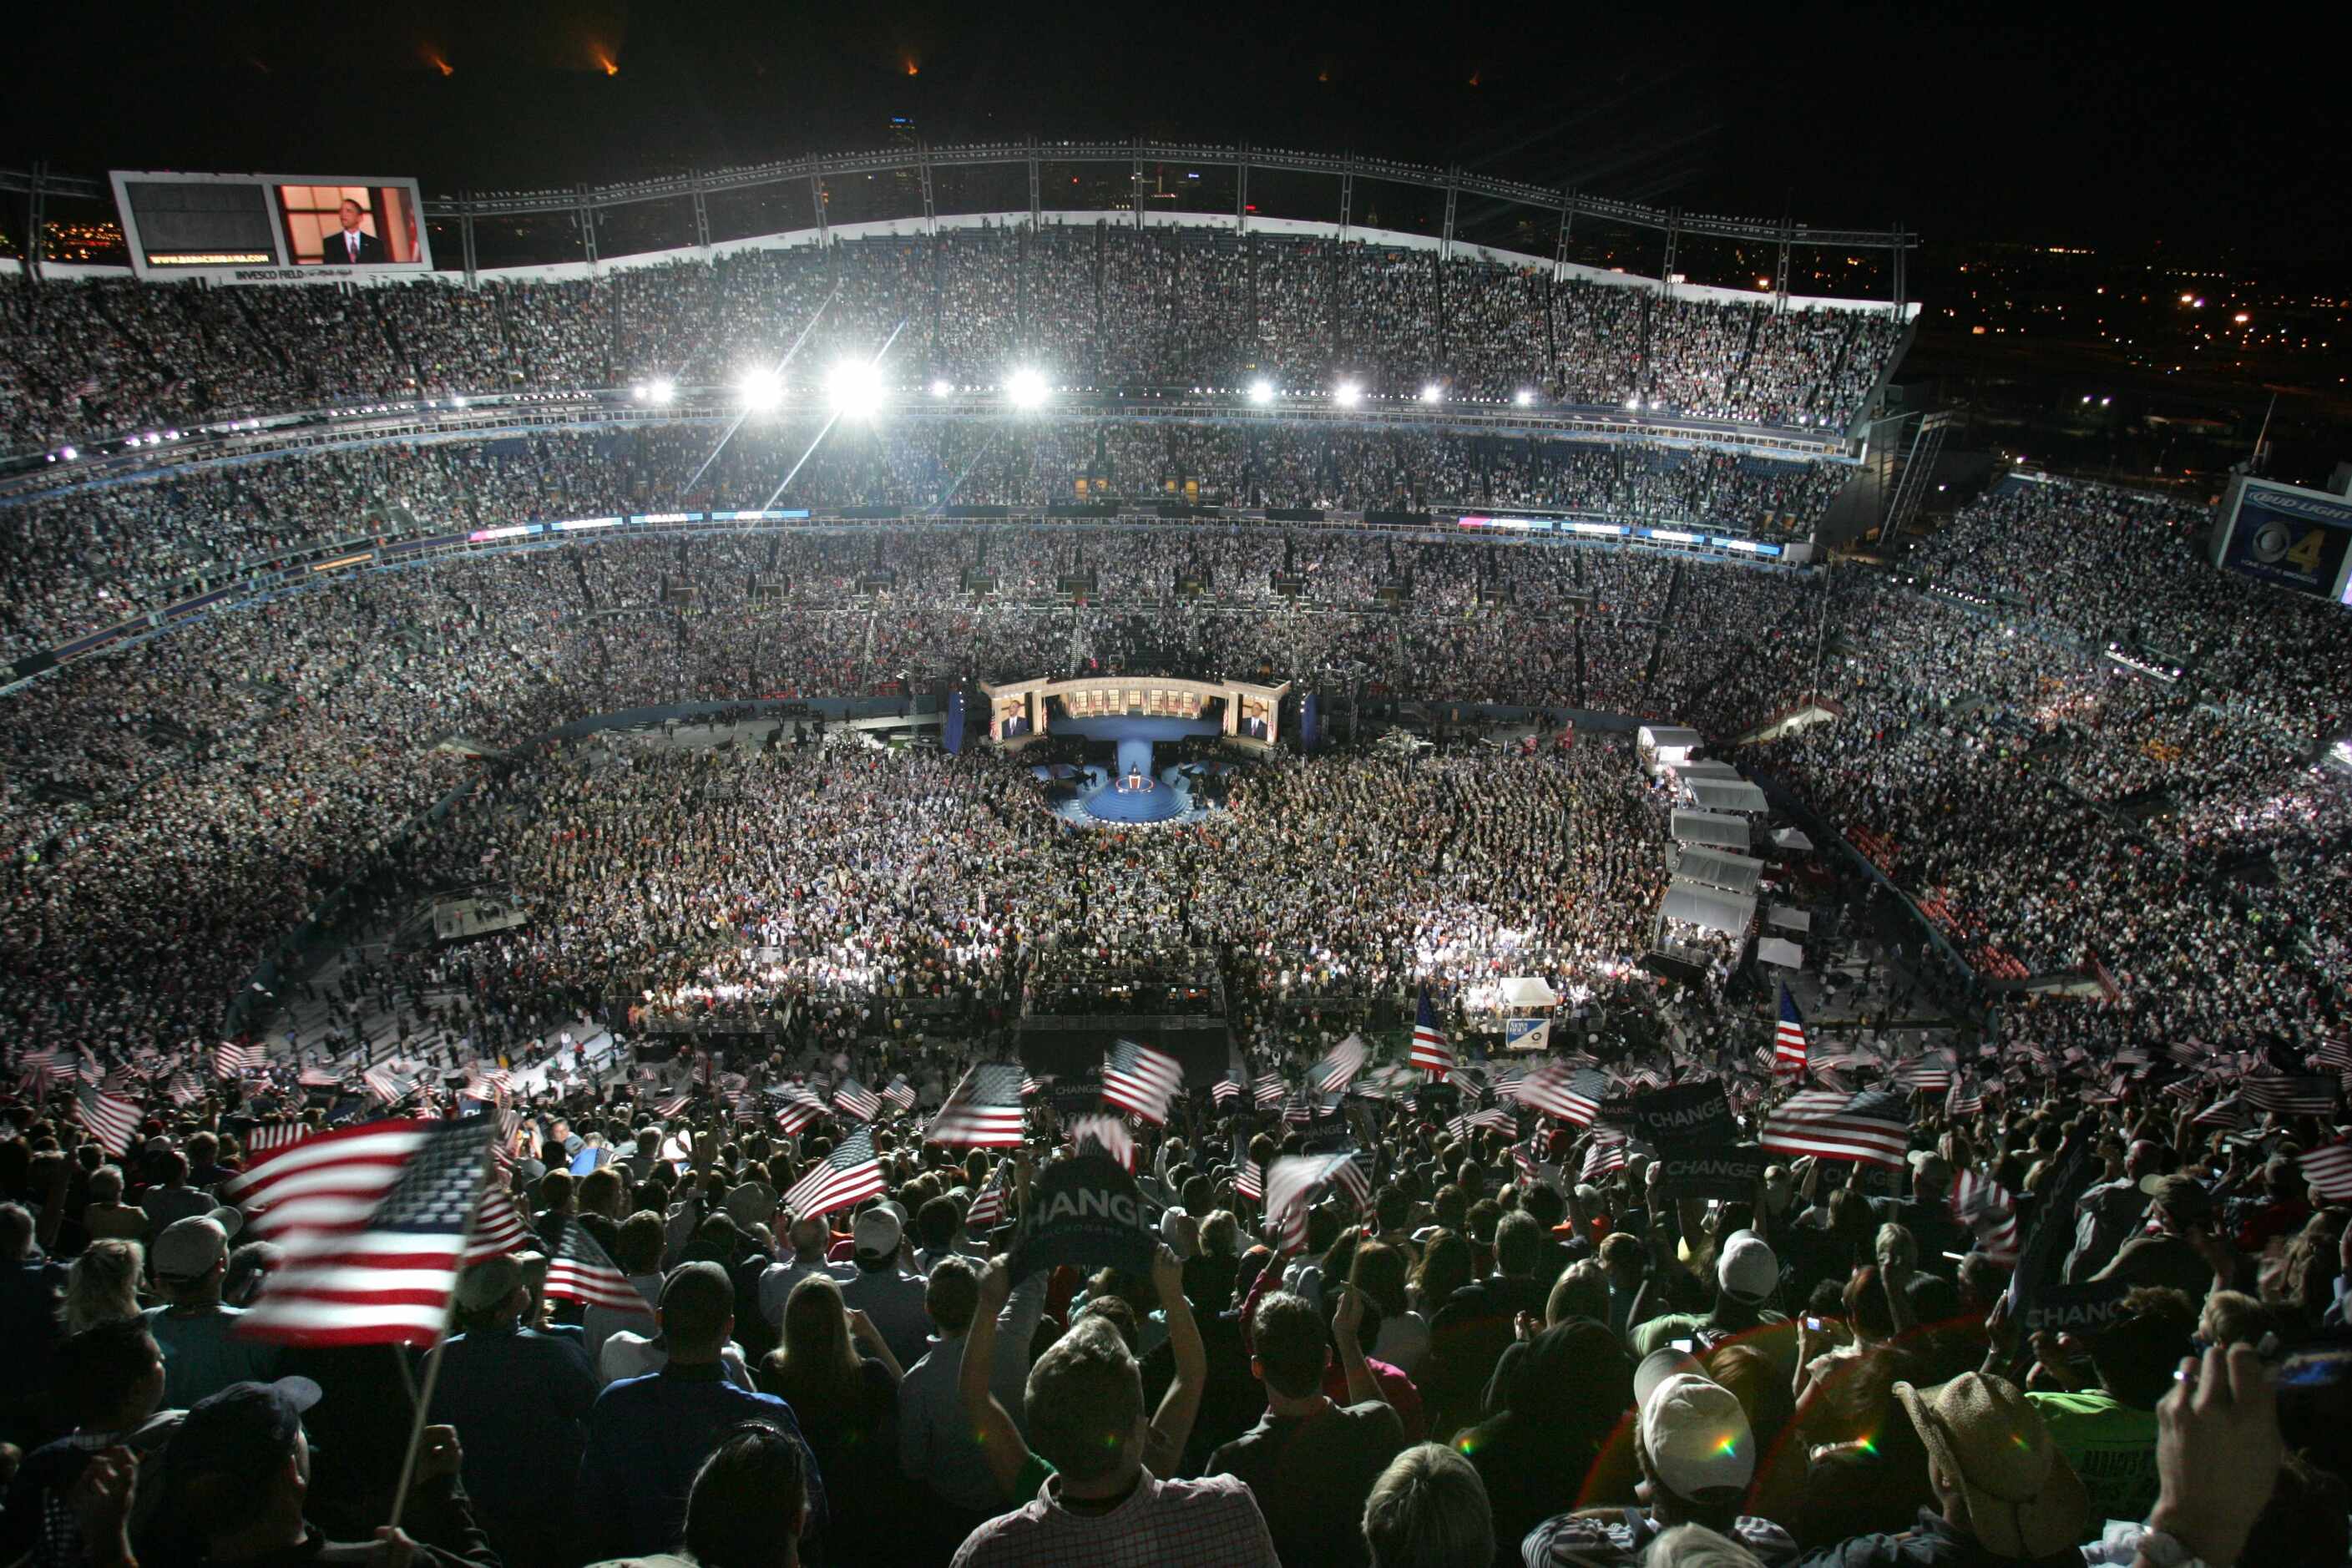 Barack Obama walked on stage in Denver to accept the nomination from the Democratic Party...